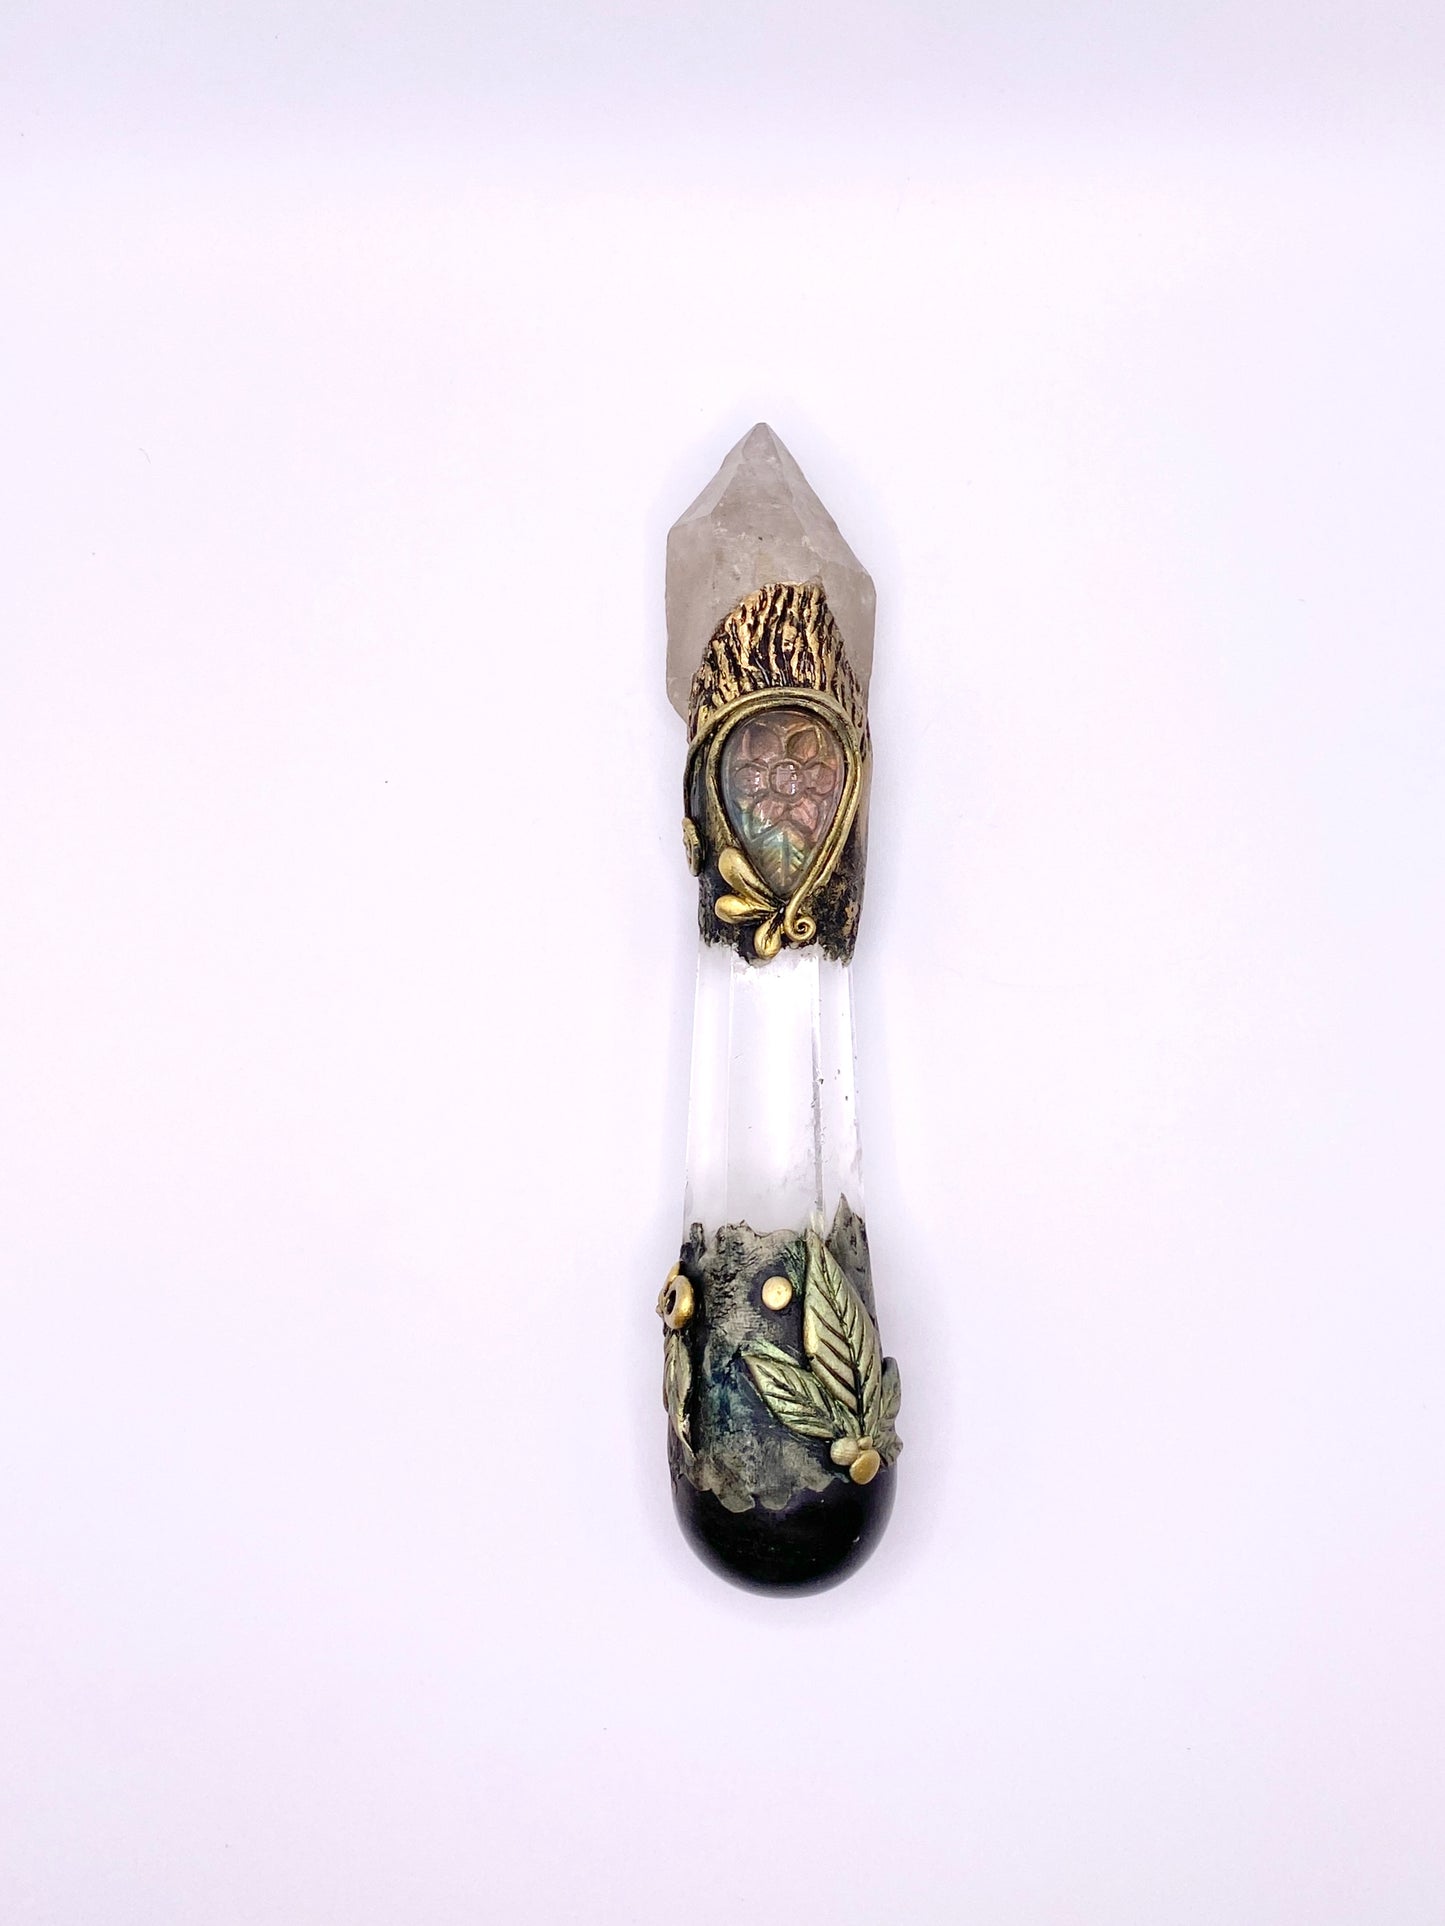 Crystal Energy Wand with Tibetan Quartz, Clear Quartz, Gold Sheen Obsidian and carved Labradorite- Reversible Metaphysical Wand